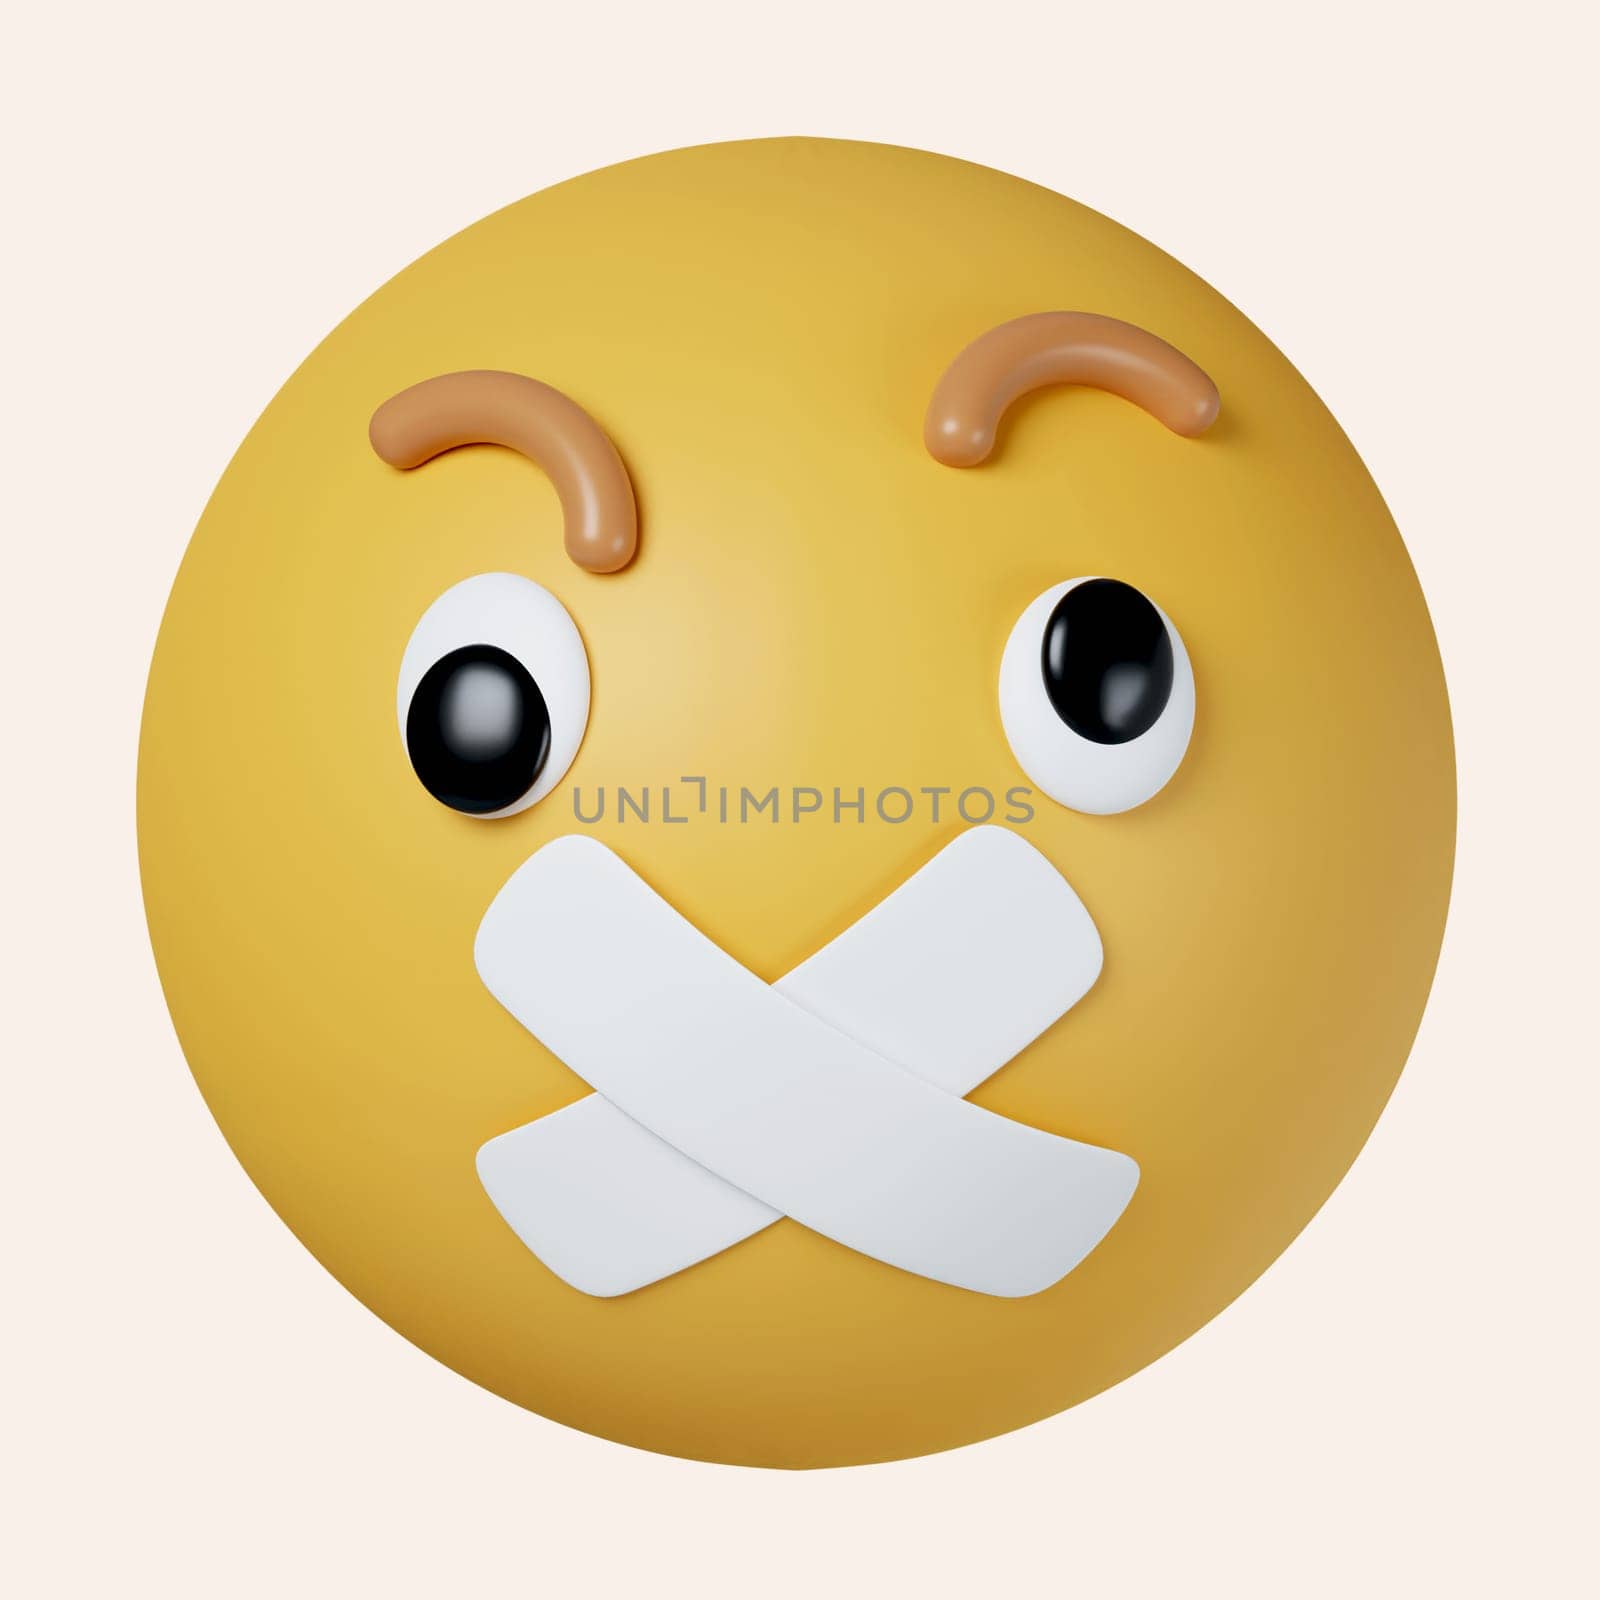 3d Taped mouth Emoji. Shut up, silent confused face. icon isolated on gray background. 3d rendering illustration. Clipping path. by meepiangraphic